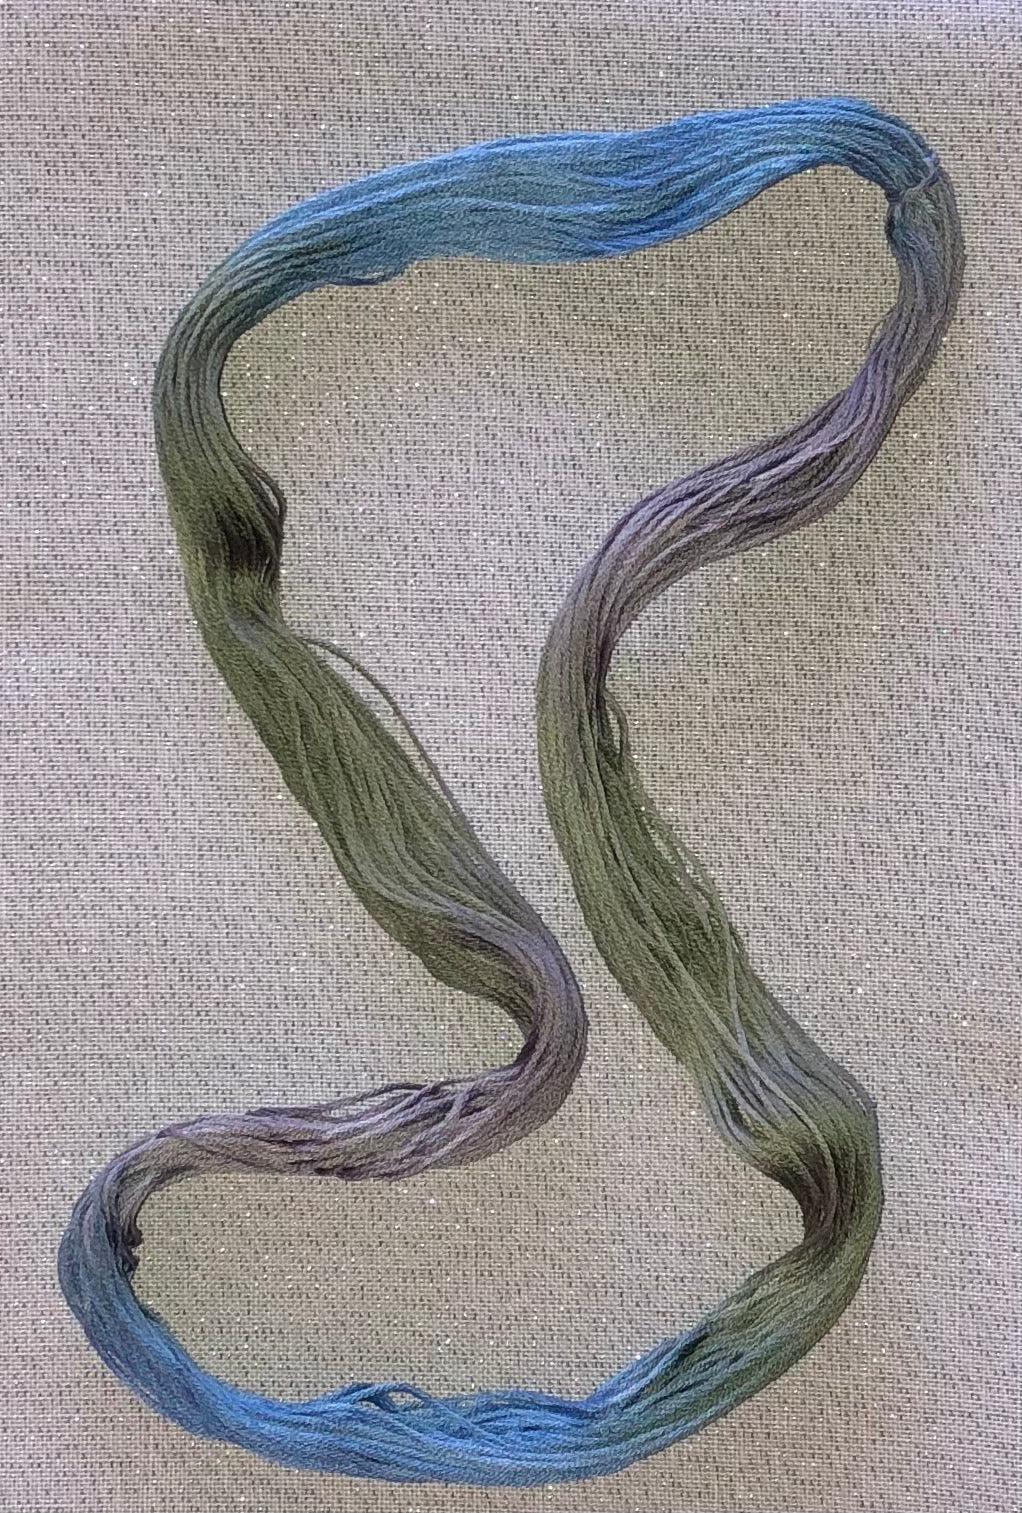 Cotton hand dyed floss - Mossy Knoll - Dyeing for Cross Stitch